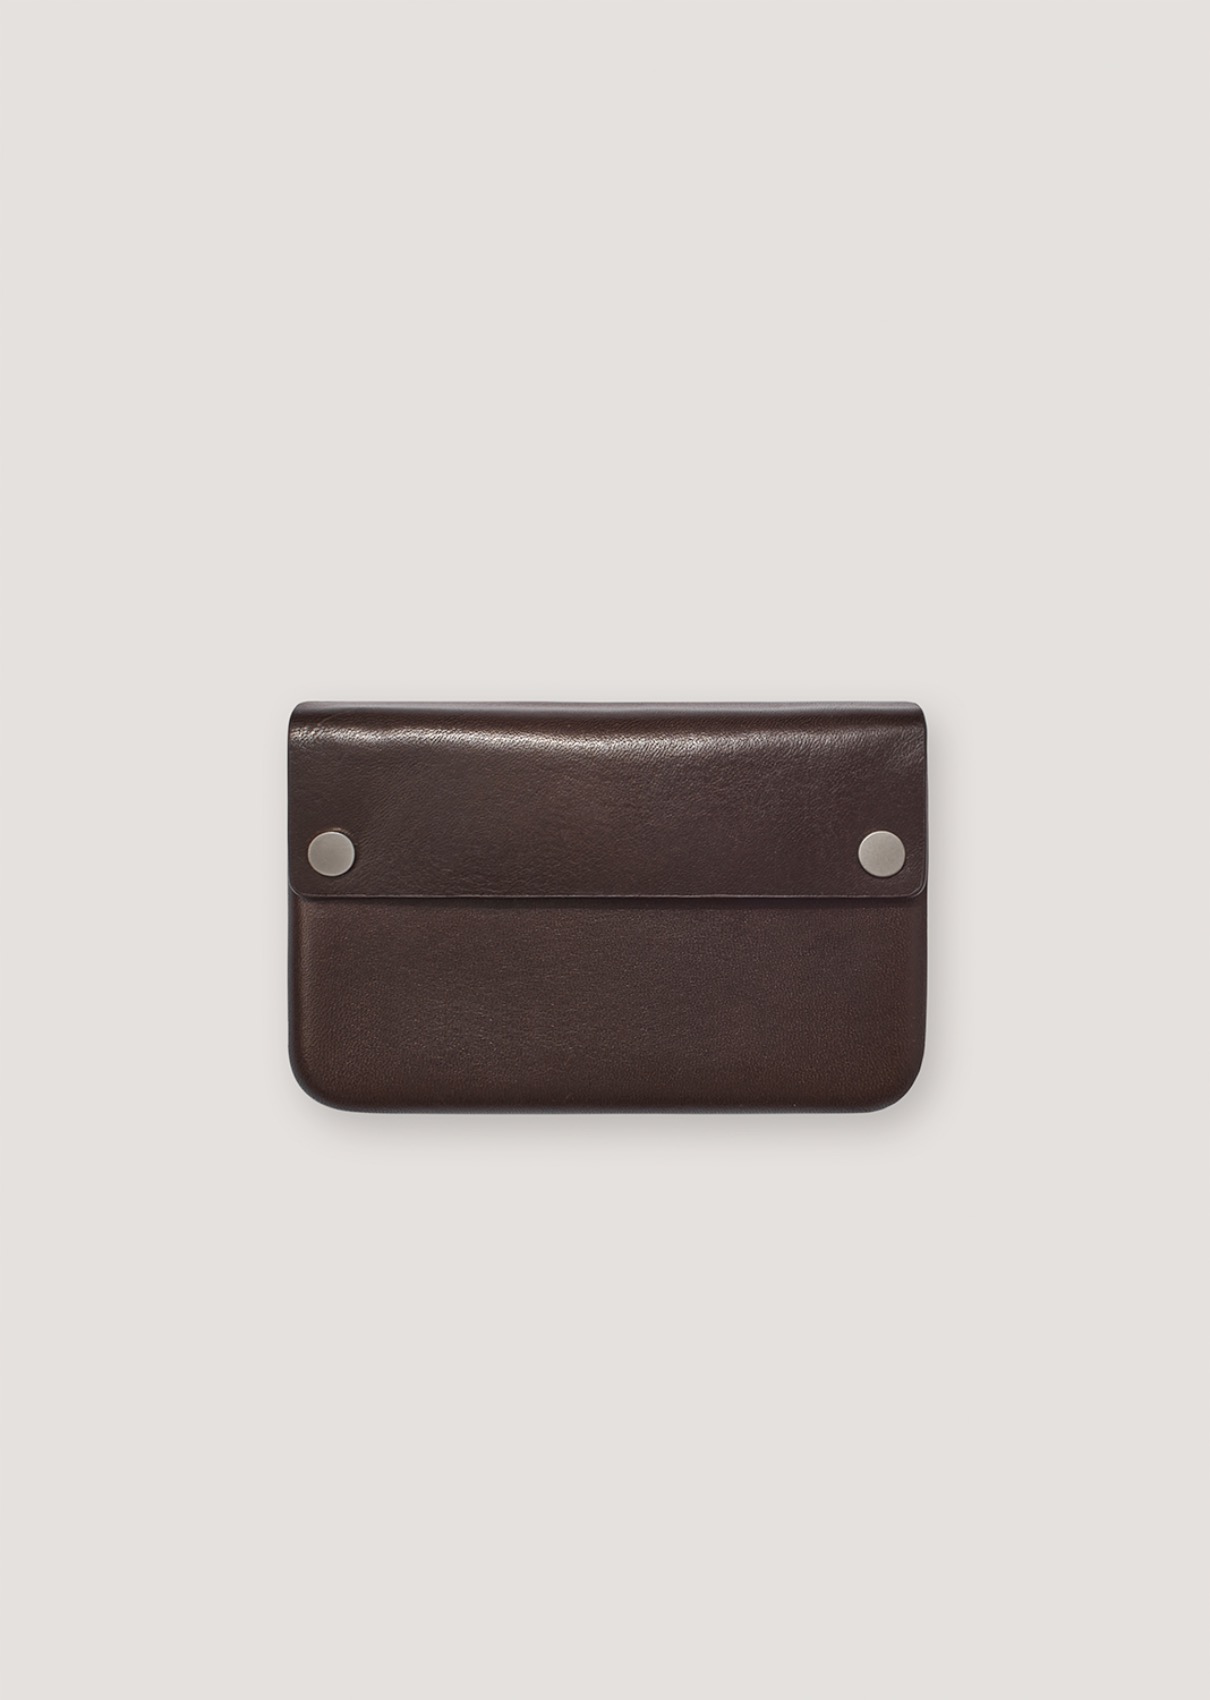 SQUARE WALLET / BROWN